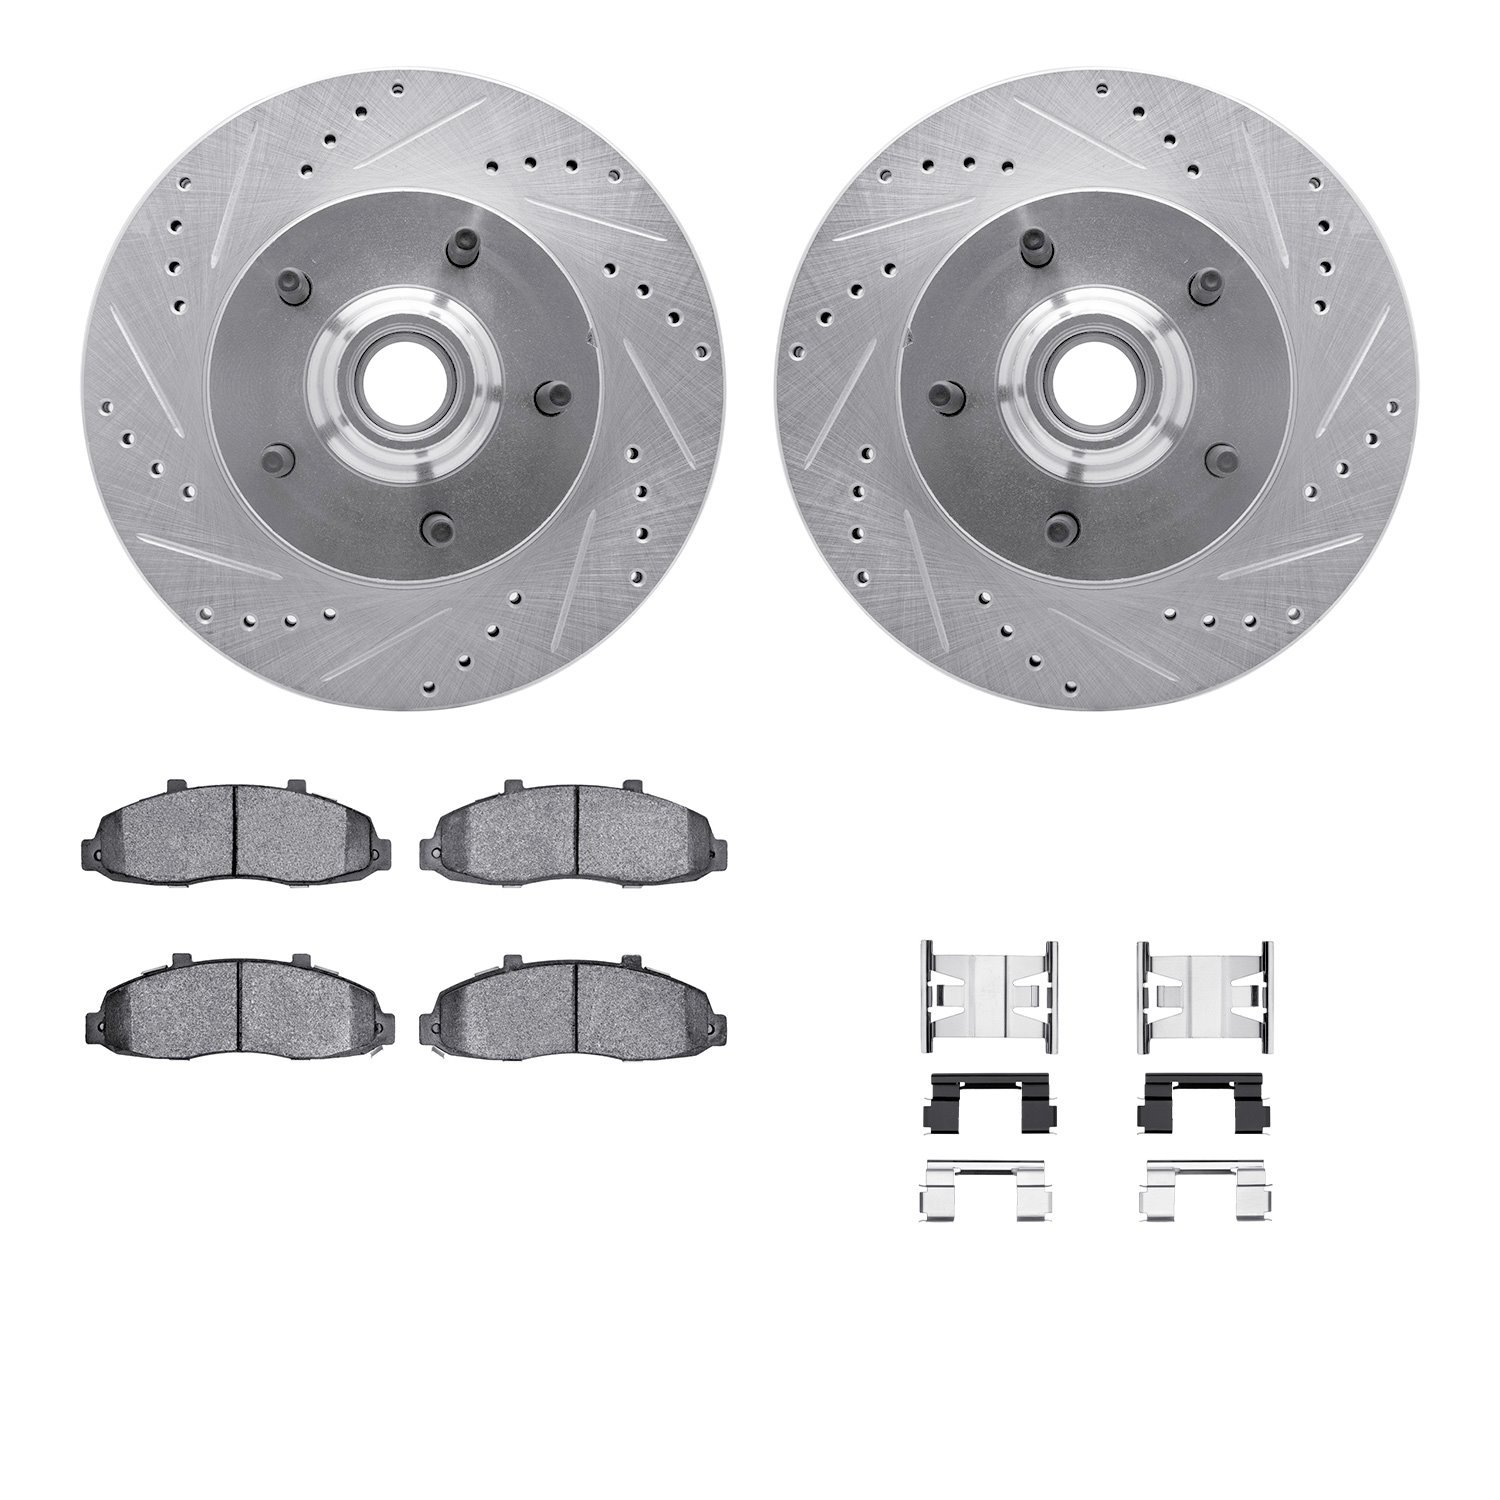 7412-54056 Drilled/Slotted Brake Rotors with Ultimate-Duty Brake Pads Kit & Hardware [Silver], 2000-2004 Ford/Lincoln/Mercury/Ma